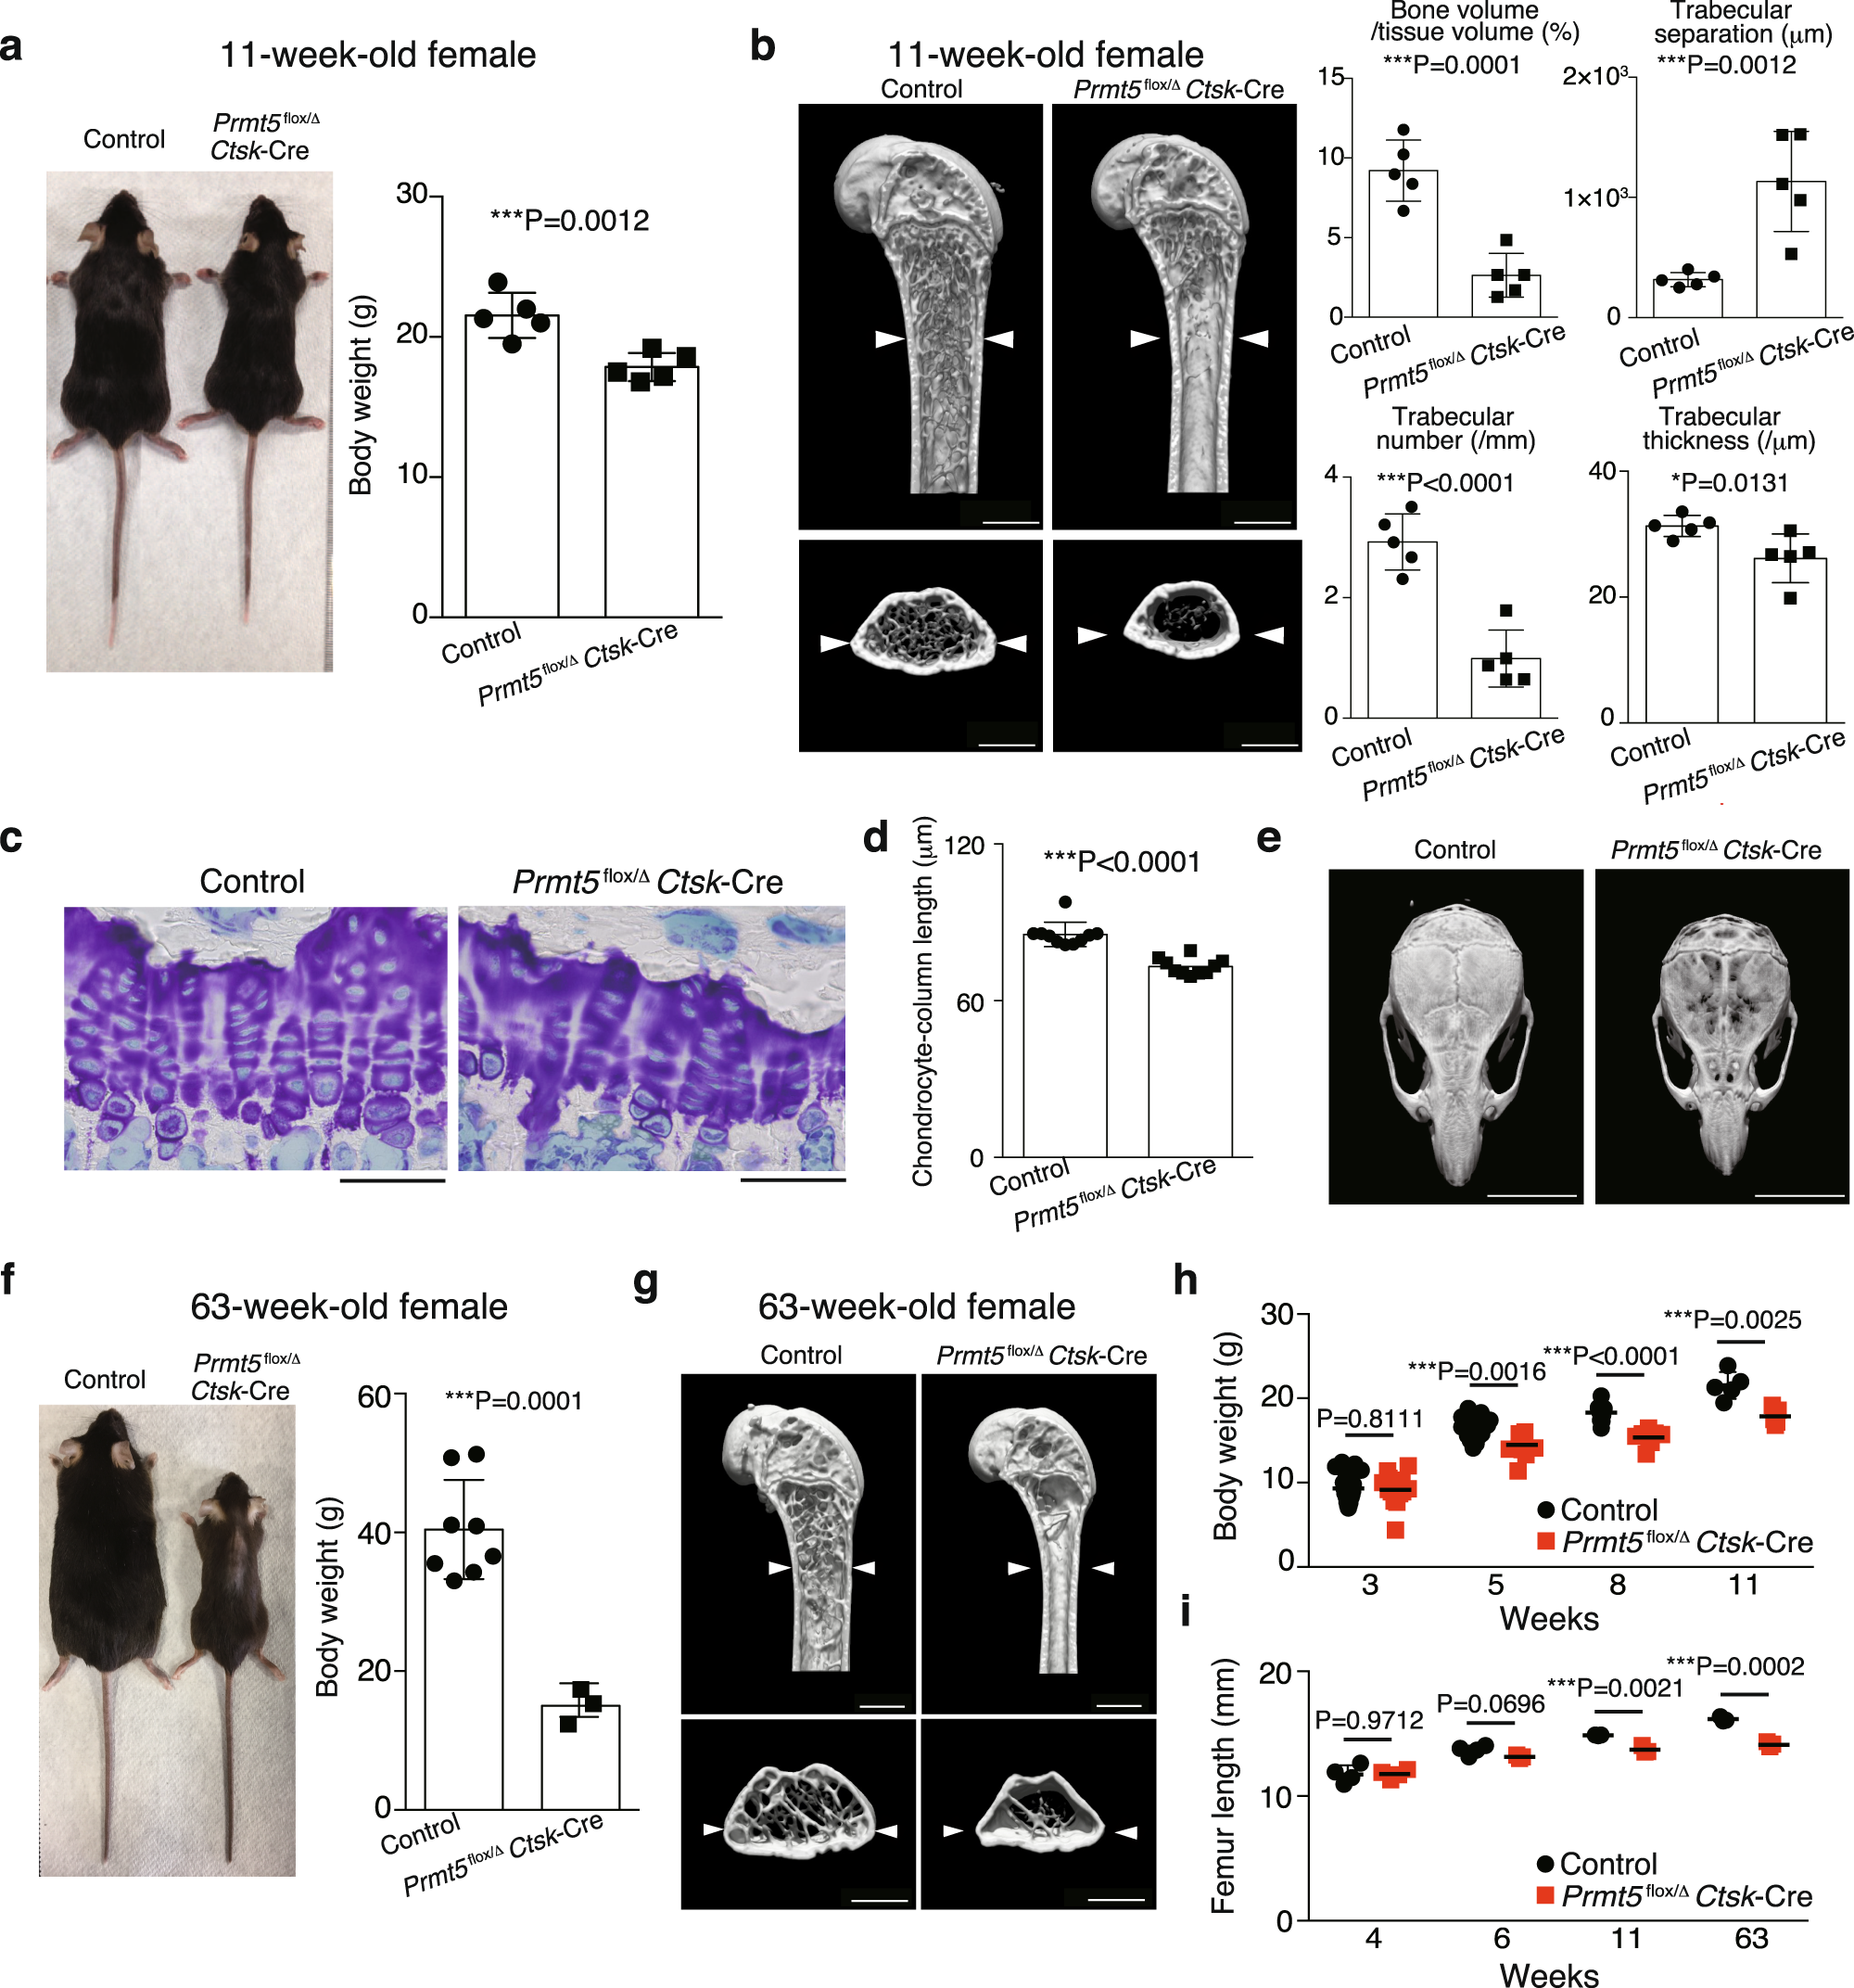 Periosteal stem cells control growth plate stem cells during postnatal skeletal growth Nature Communications